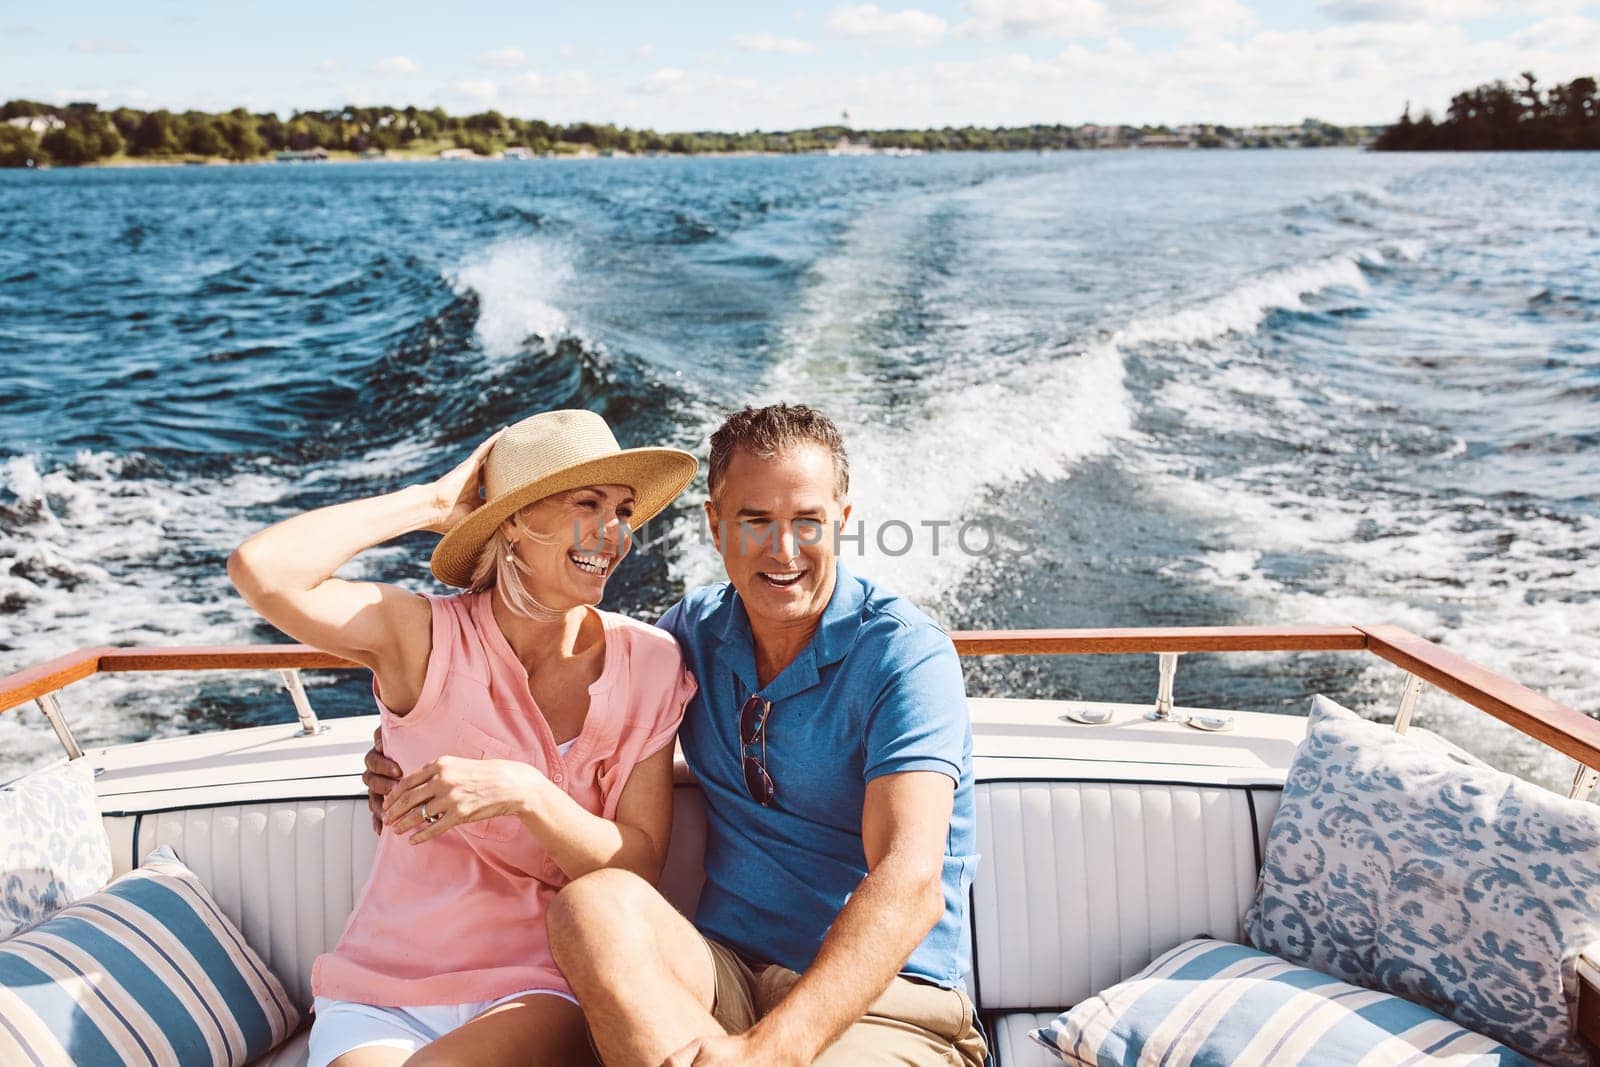 Its not where you go, its who you travel with. a mature couple enjoying a relaxing boat ride. by YuriArcurs